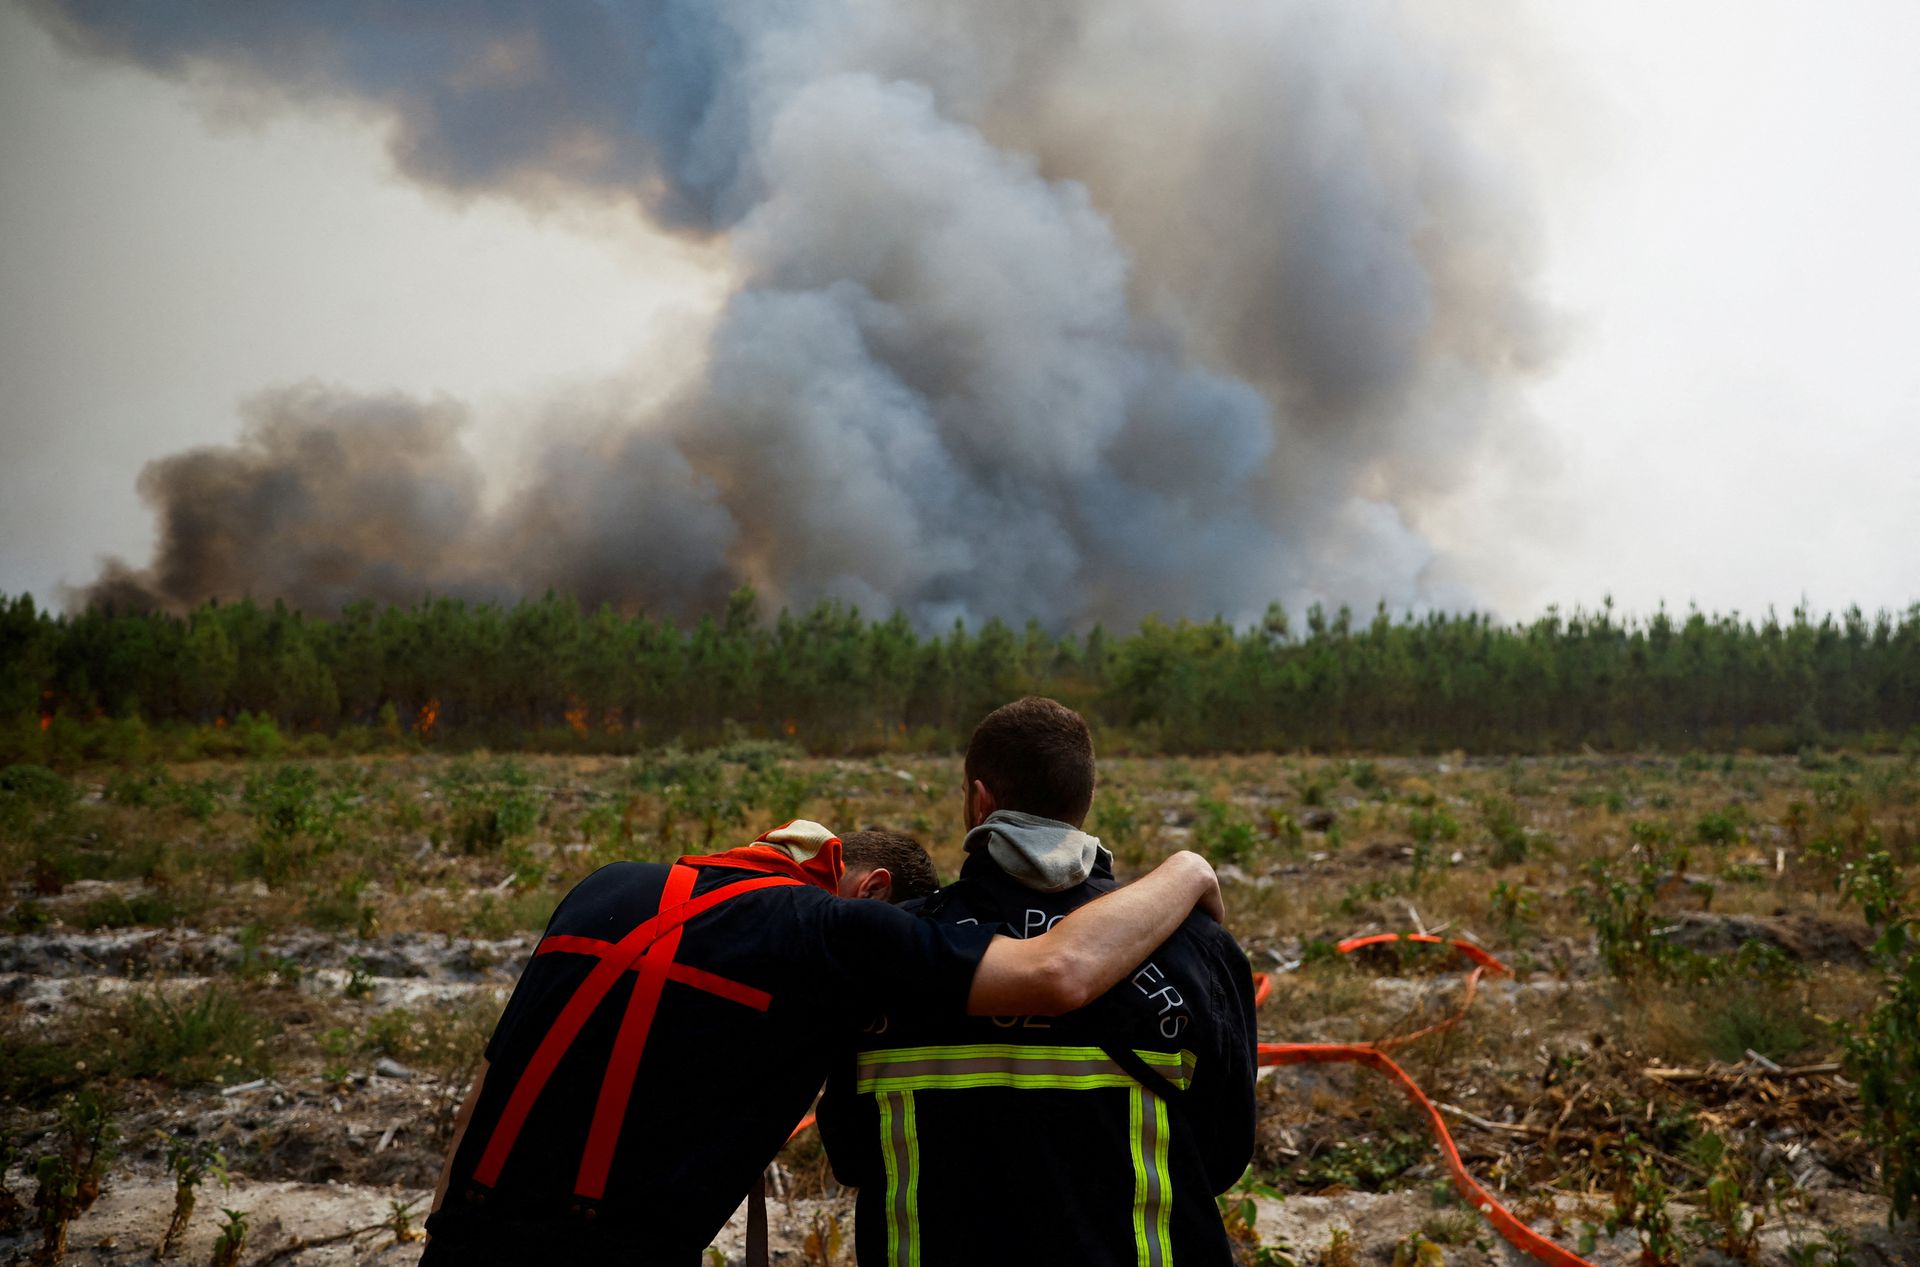 Firefighters embrace as they work to contain a fire in Saint-Magne, as wildfires continue to spread in the Gironde region of southwestern France, 11 August 2022. Stephane Mahe / REUTERS